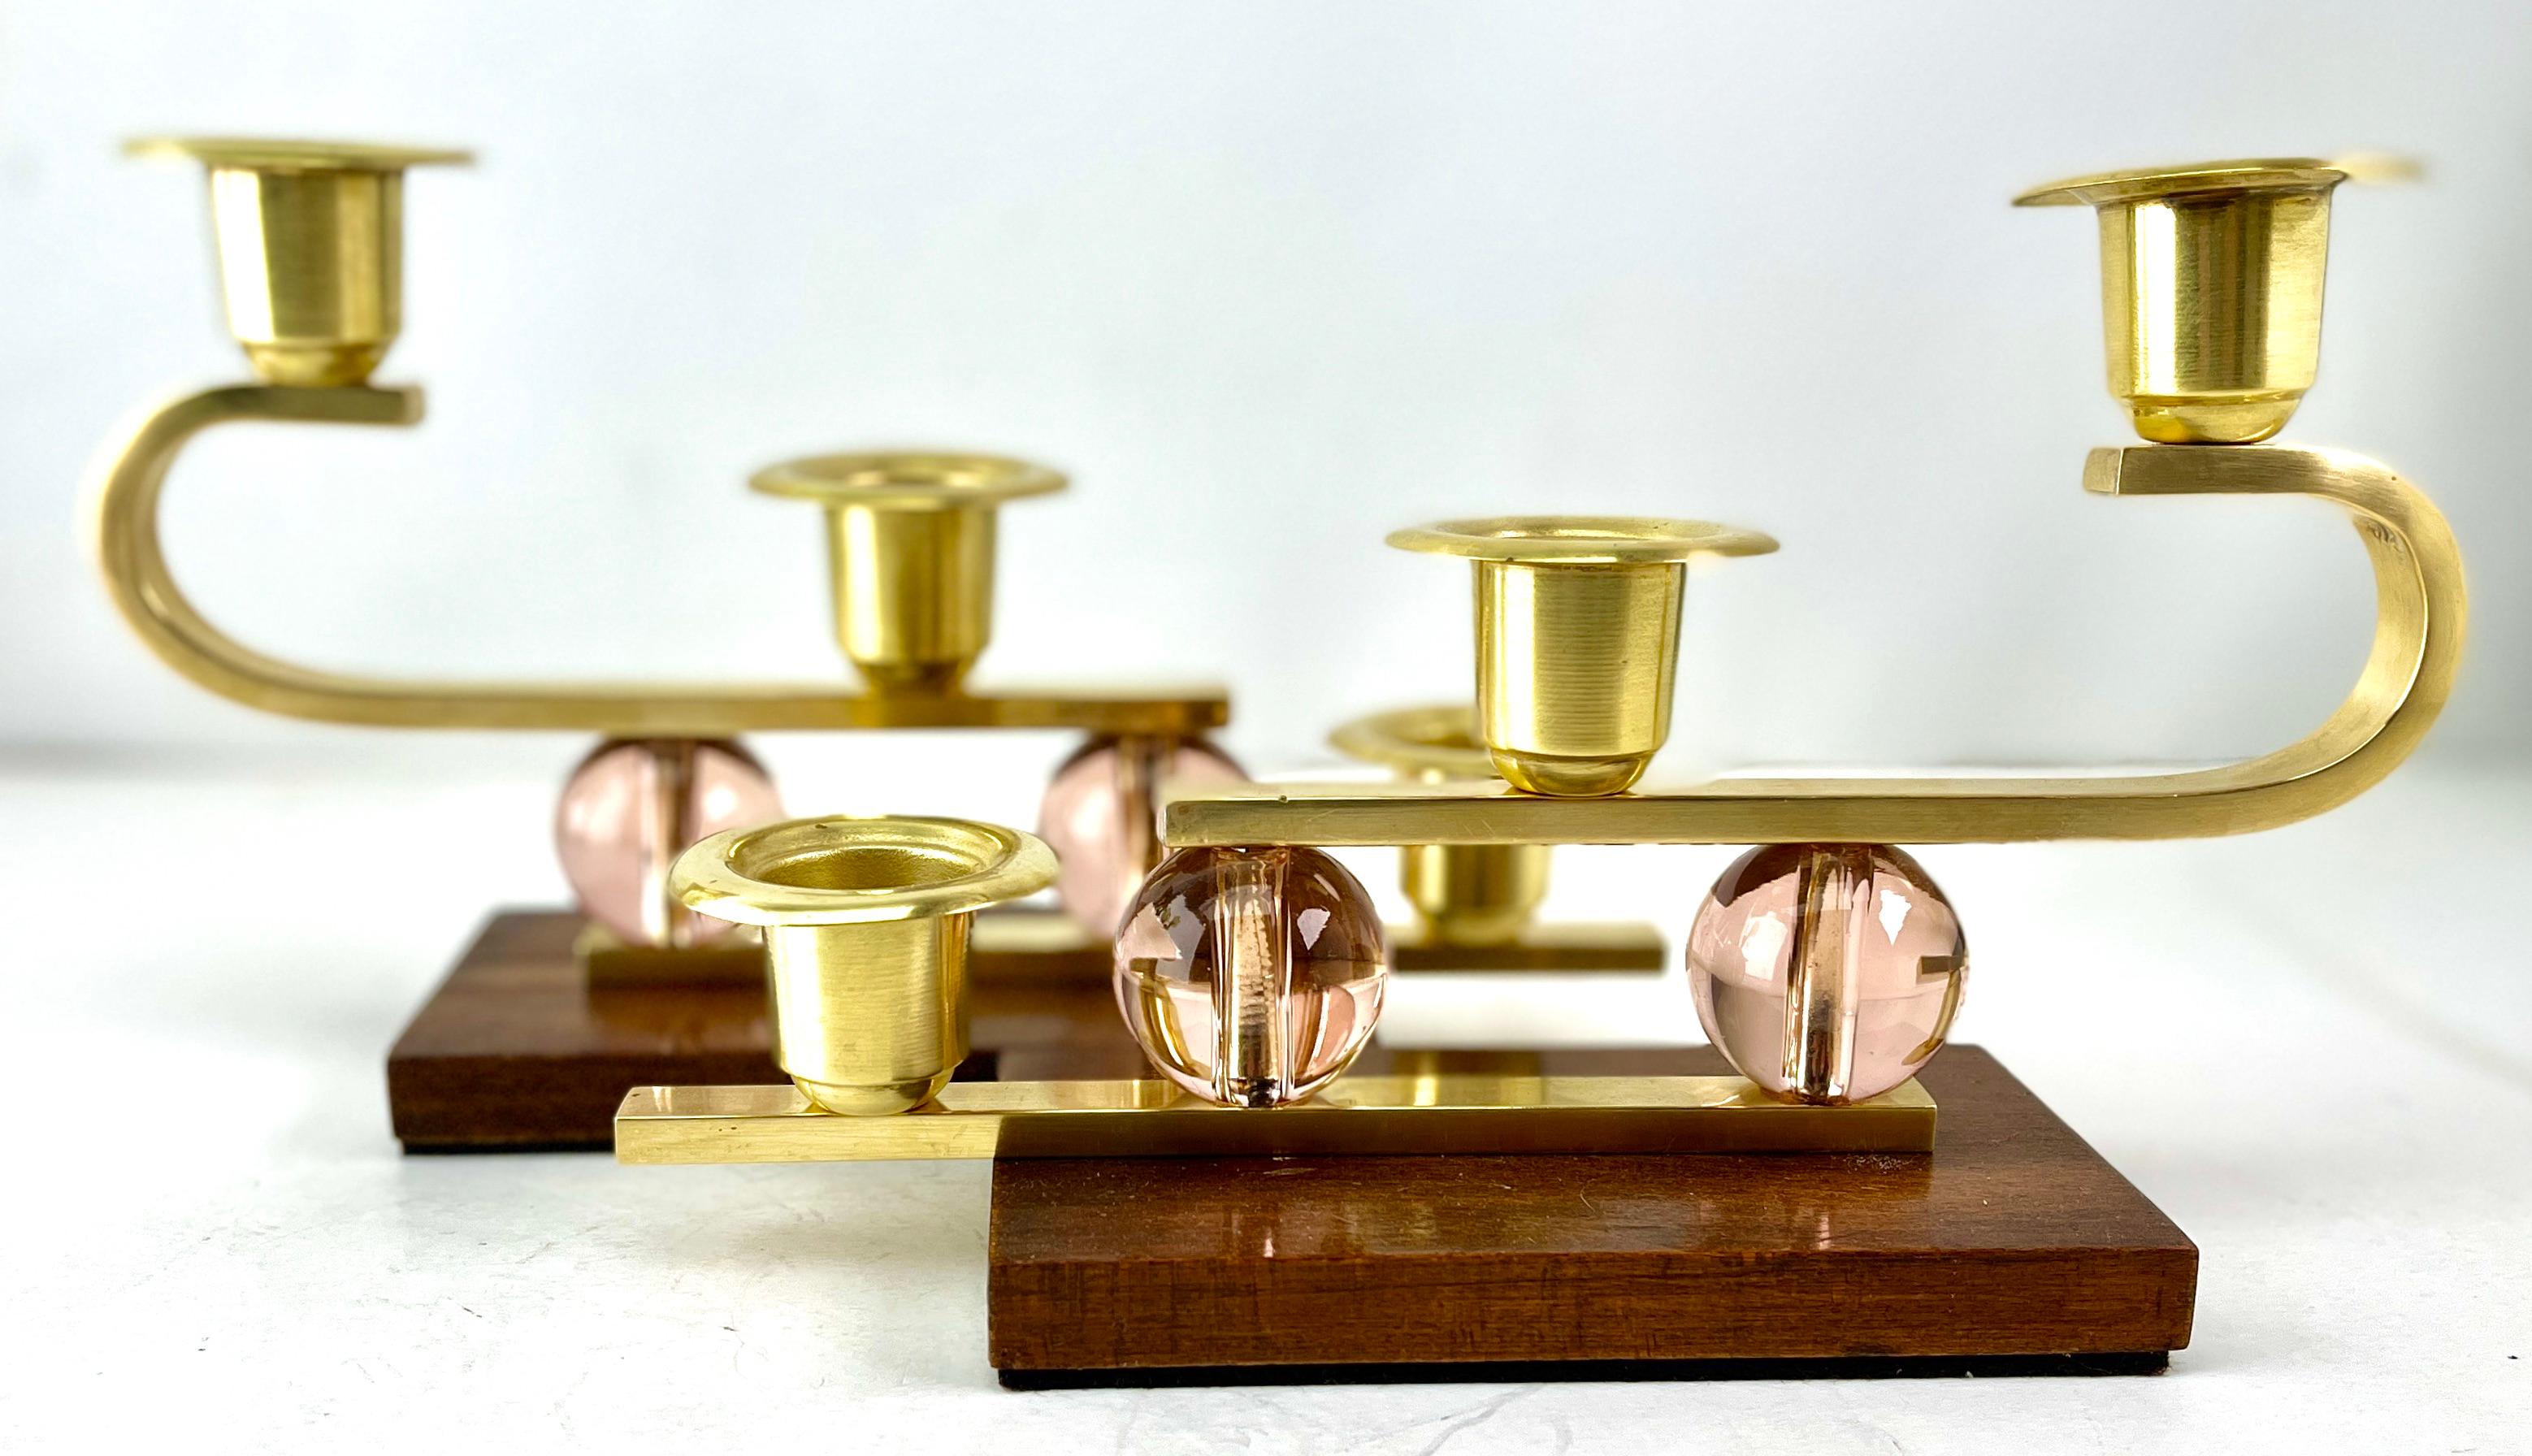 Art Deco Wooden Base and Brass Candlestick whit Glass Details, 1930s For Sale 1